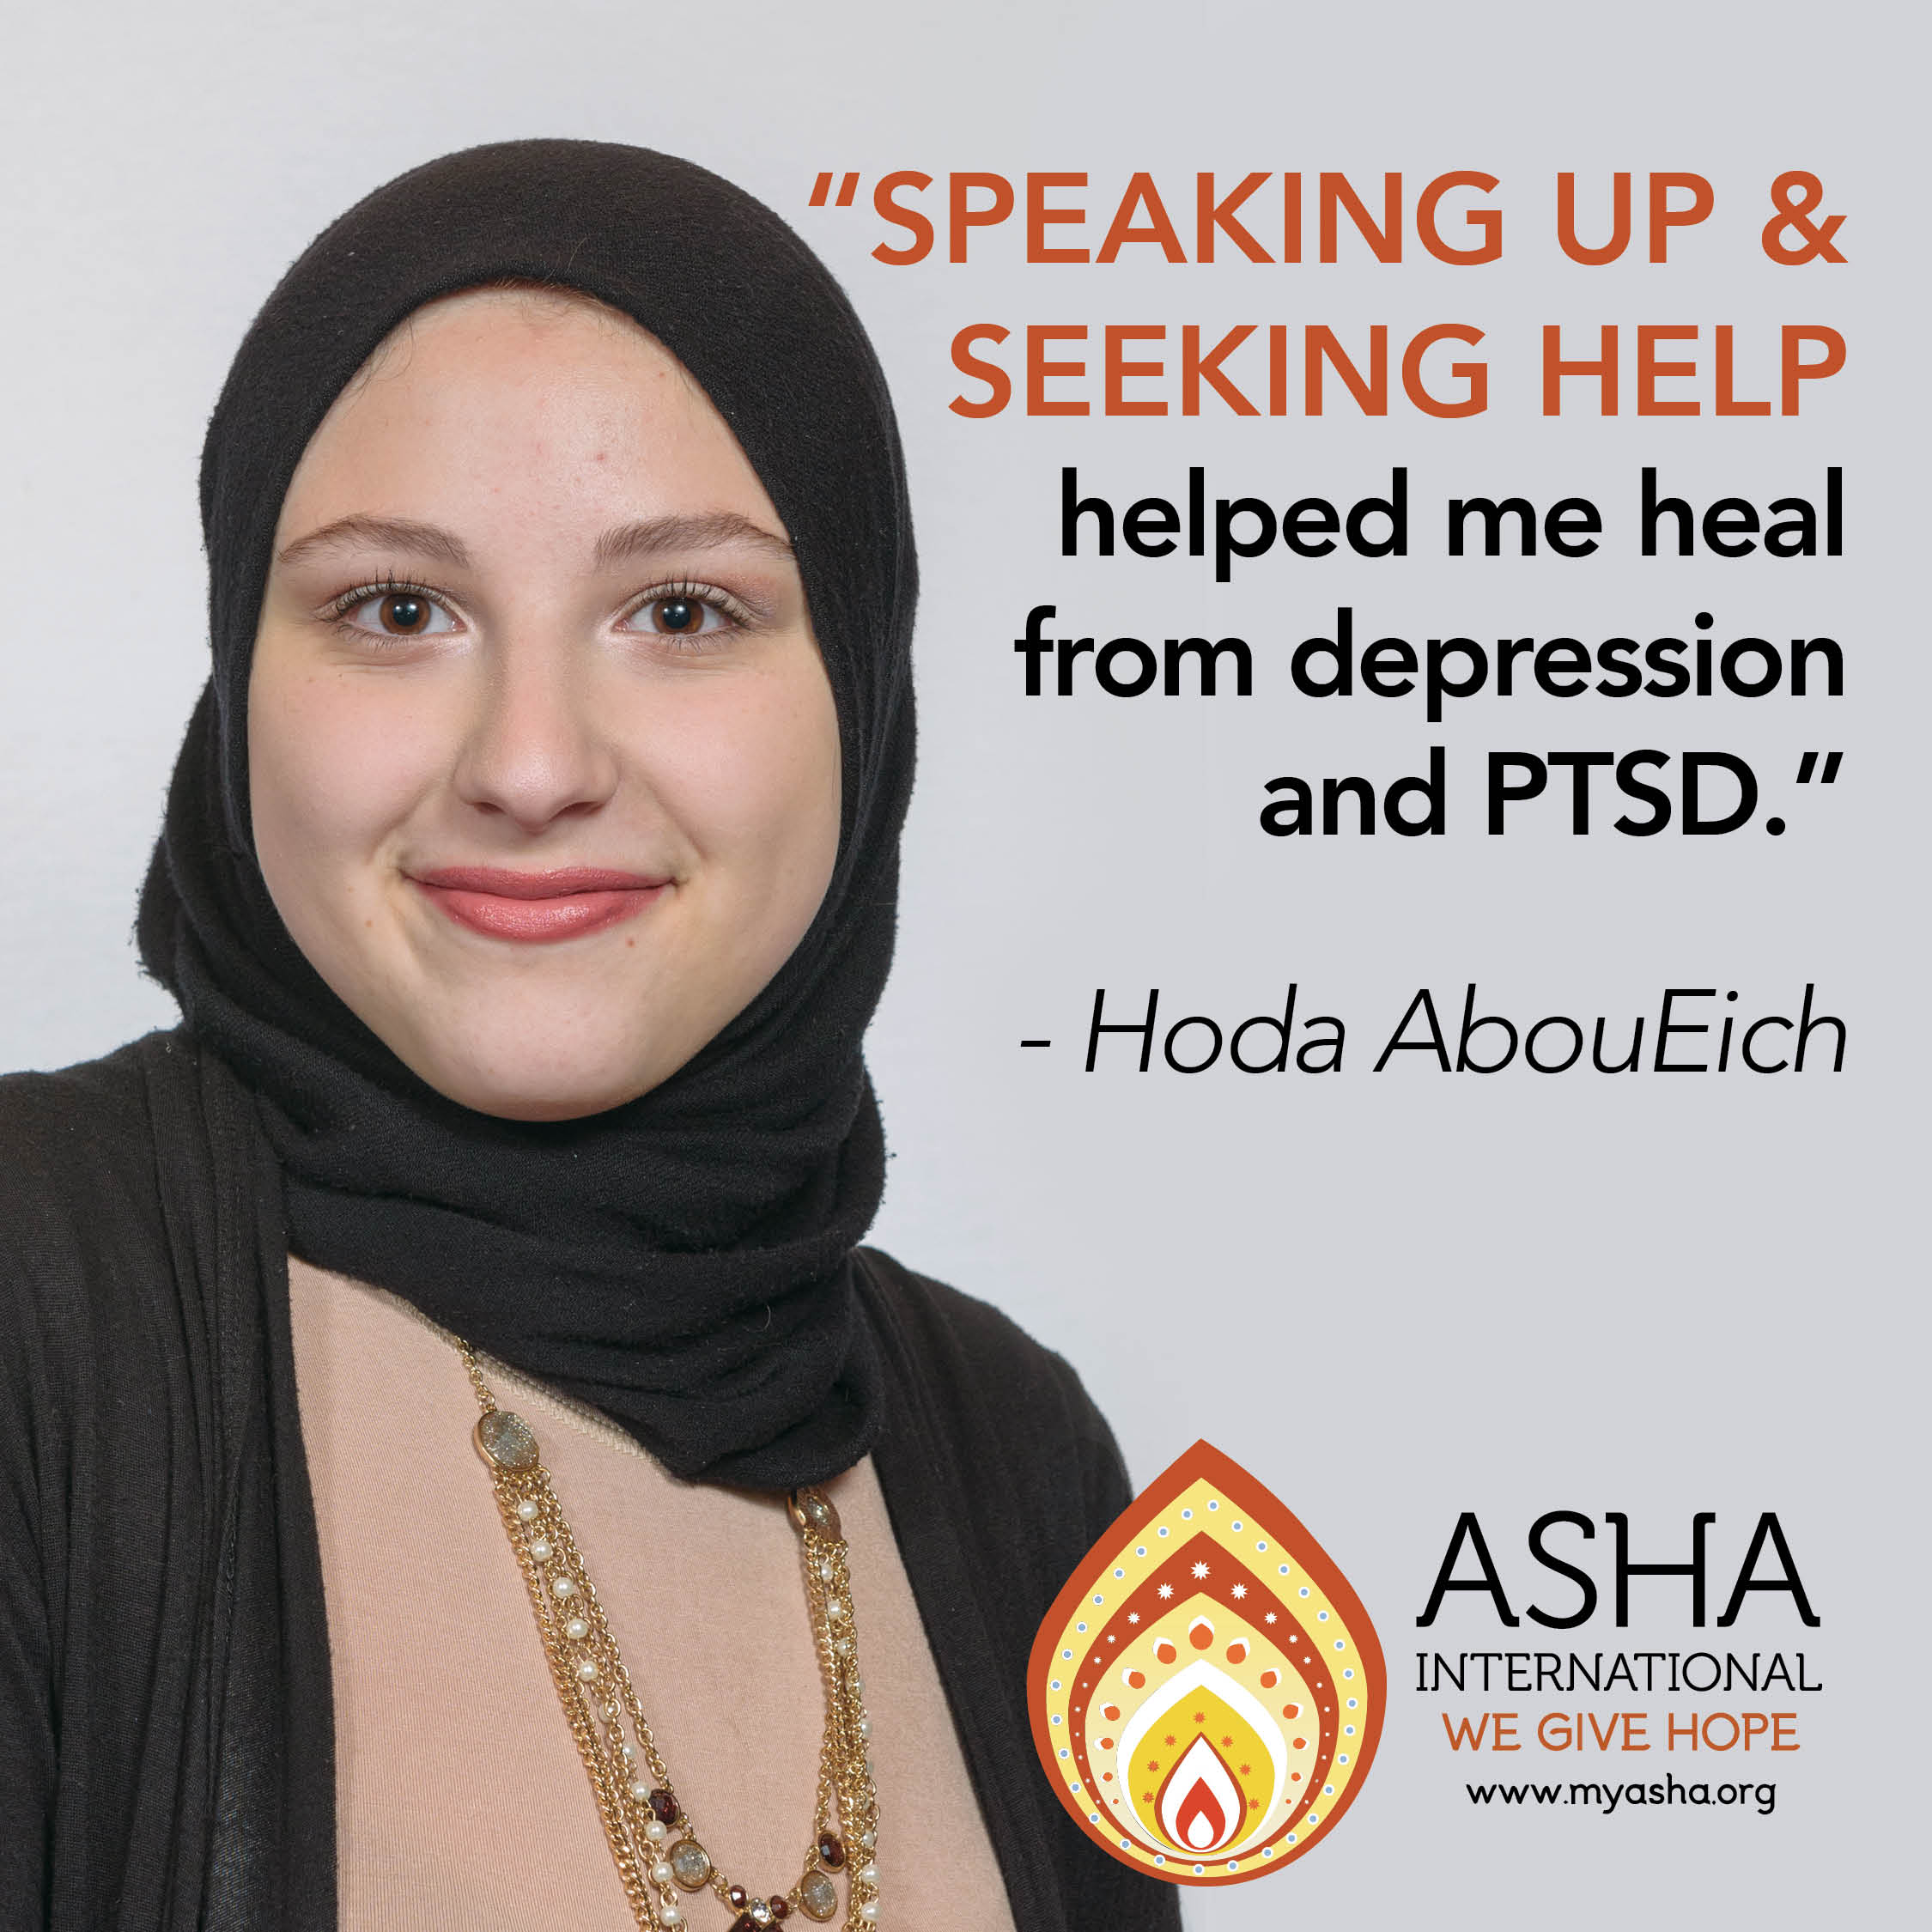 Speaking up & seeking help helped me heal from PTSD and depression.